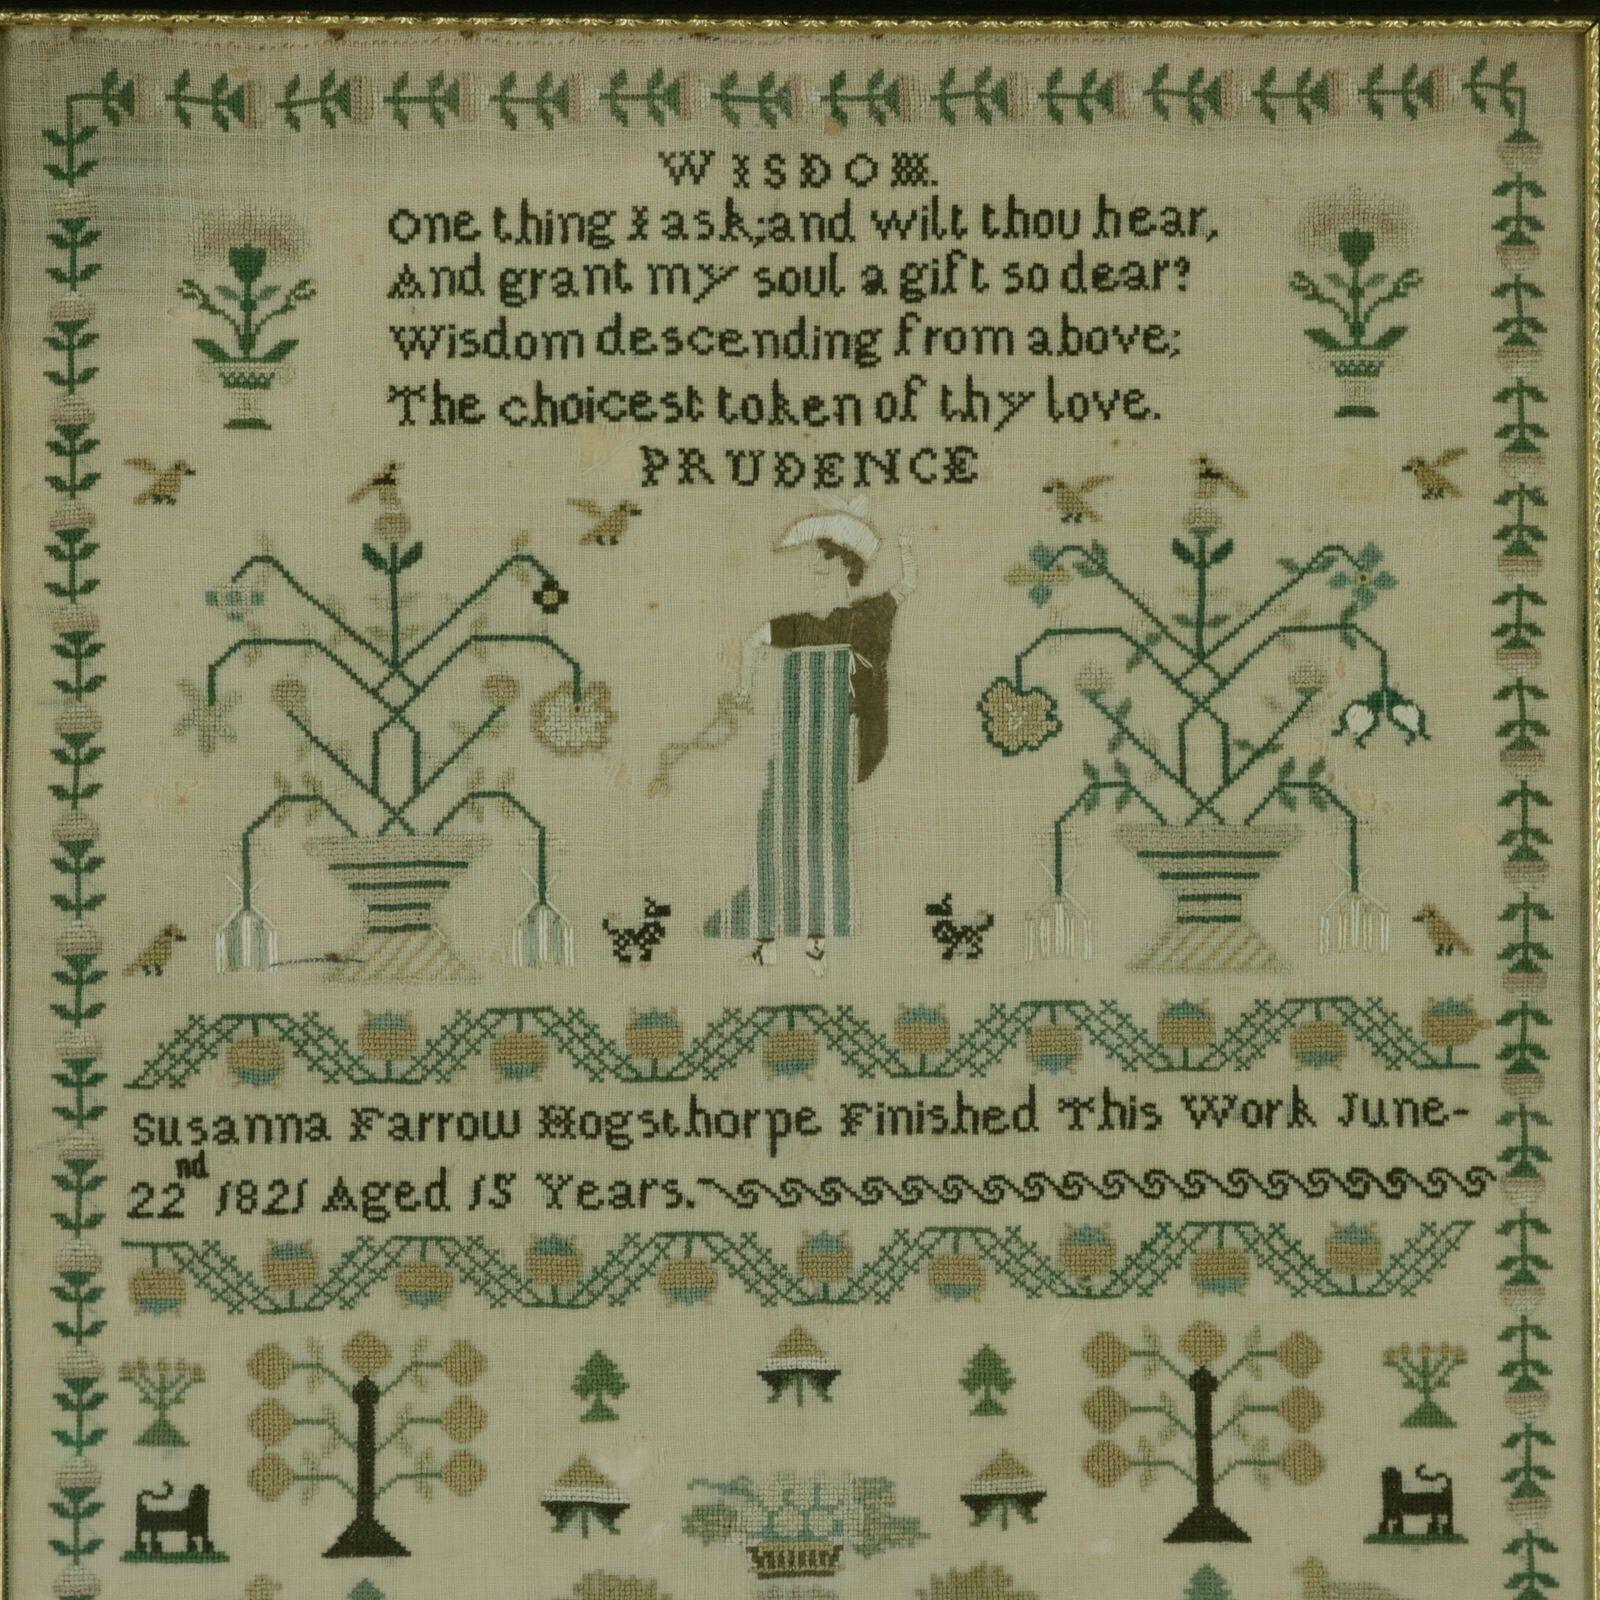 Antique Sampler, 1821, by Susanna Farrow. The sampler is worked in silk on a linen ground, mainly in cross stitch. Meandering strawberry border. Colours green, copper, gold, silver, dark brown and blue. Verse entitled 'WISDOM' reads, 'One thing I